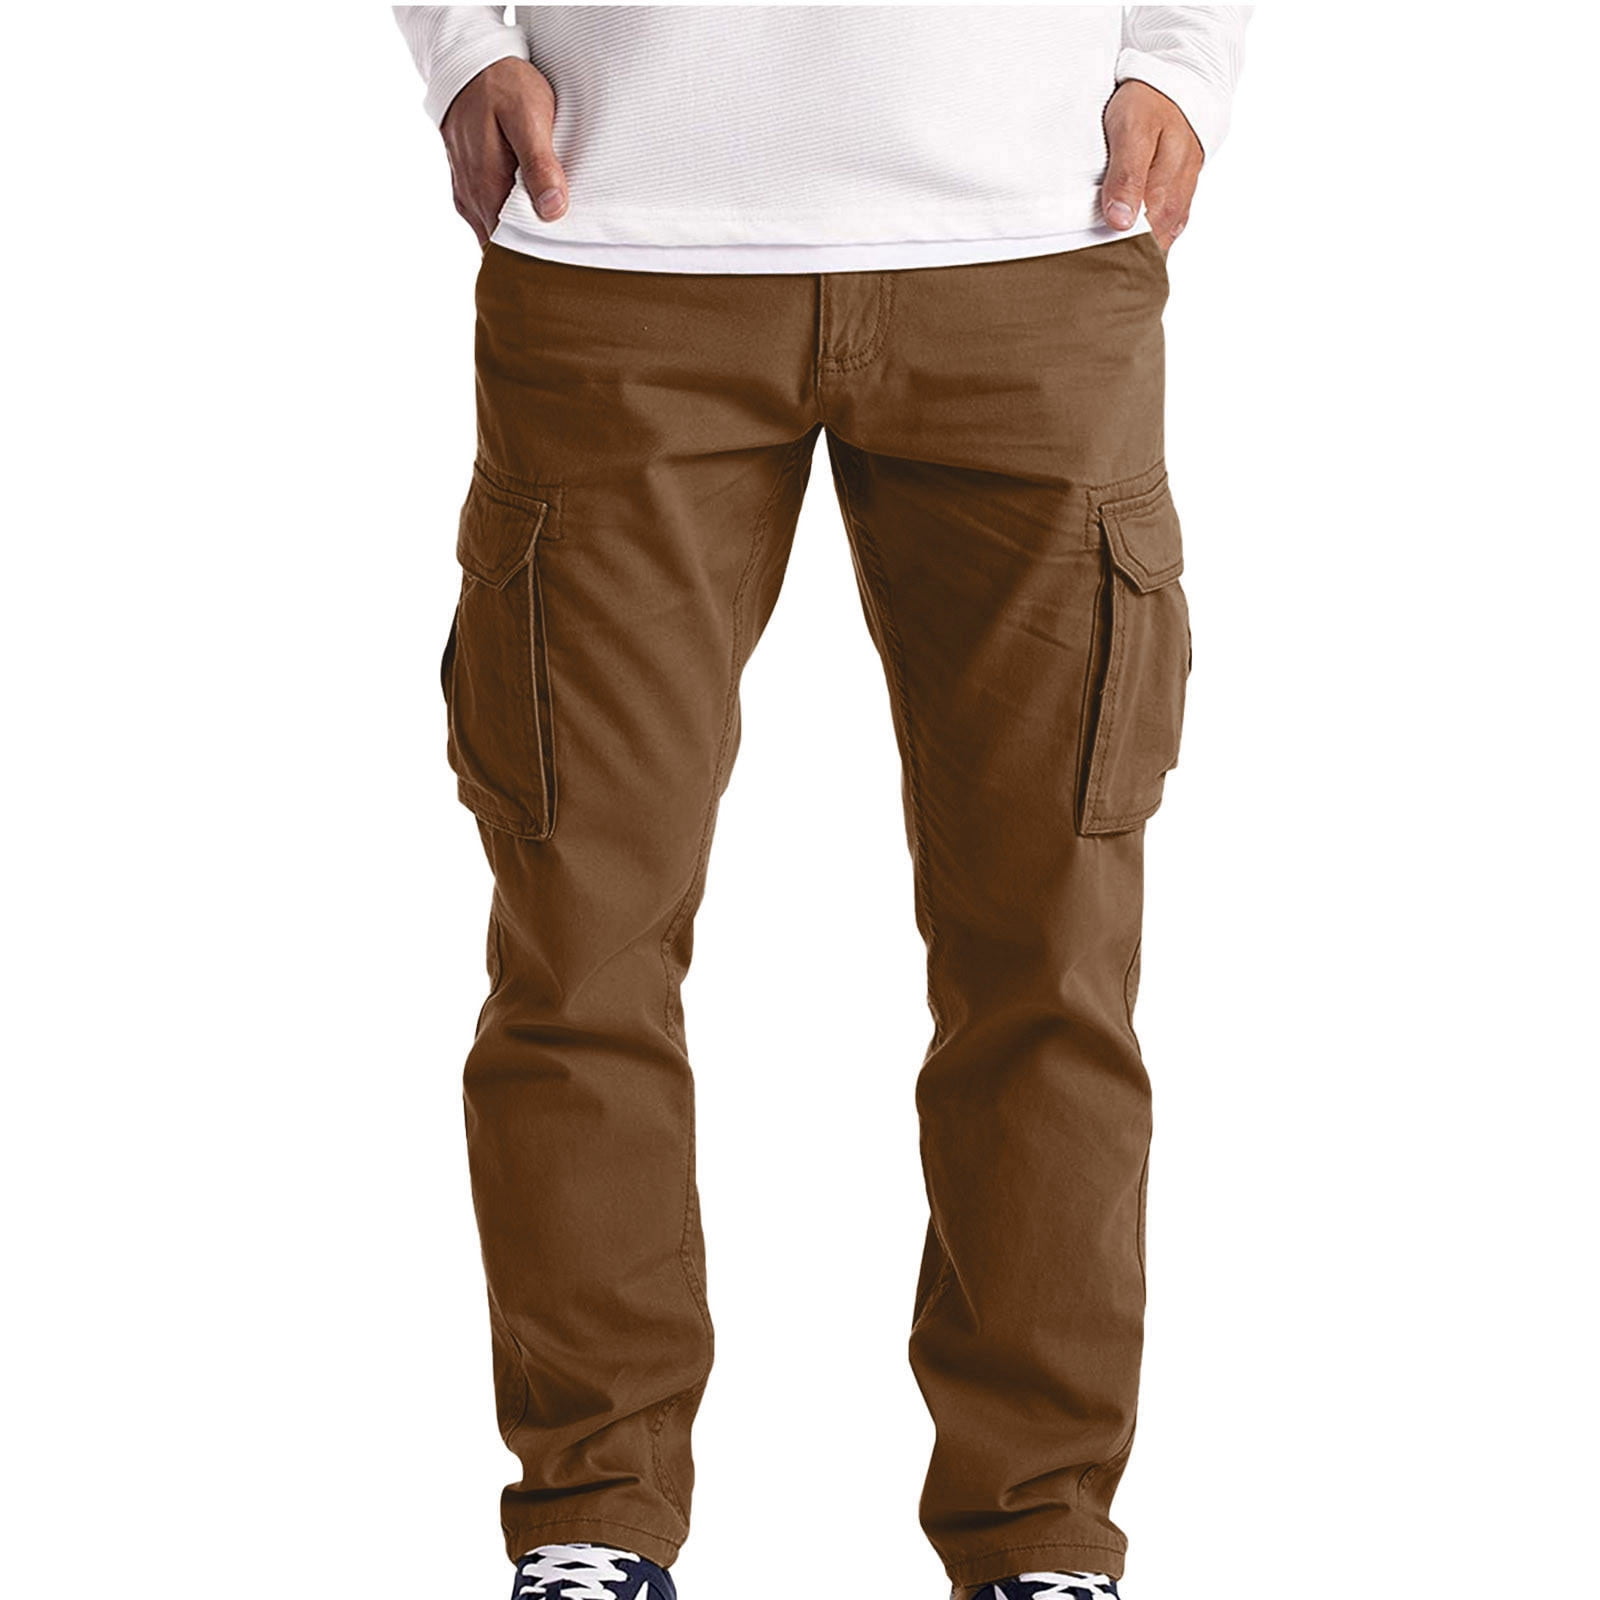 Cargo Pants for Men Relaxed Fit Causal Pants Slim Work Streetwear Baggy  Pants Fashion Outdoor Hiking Pant with Multi-Pocket 